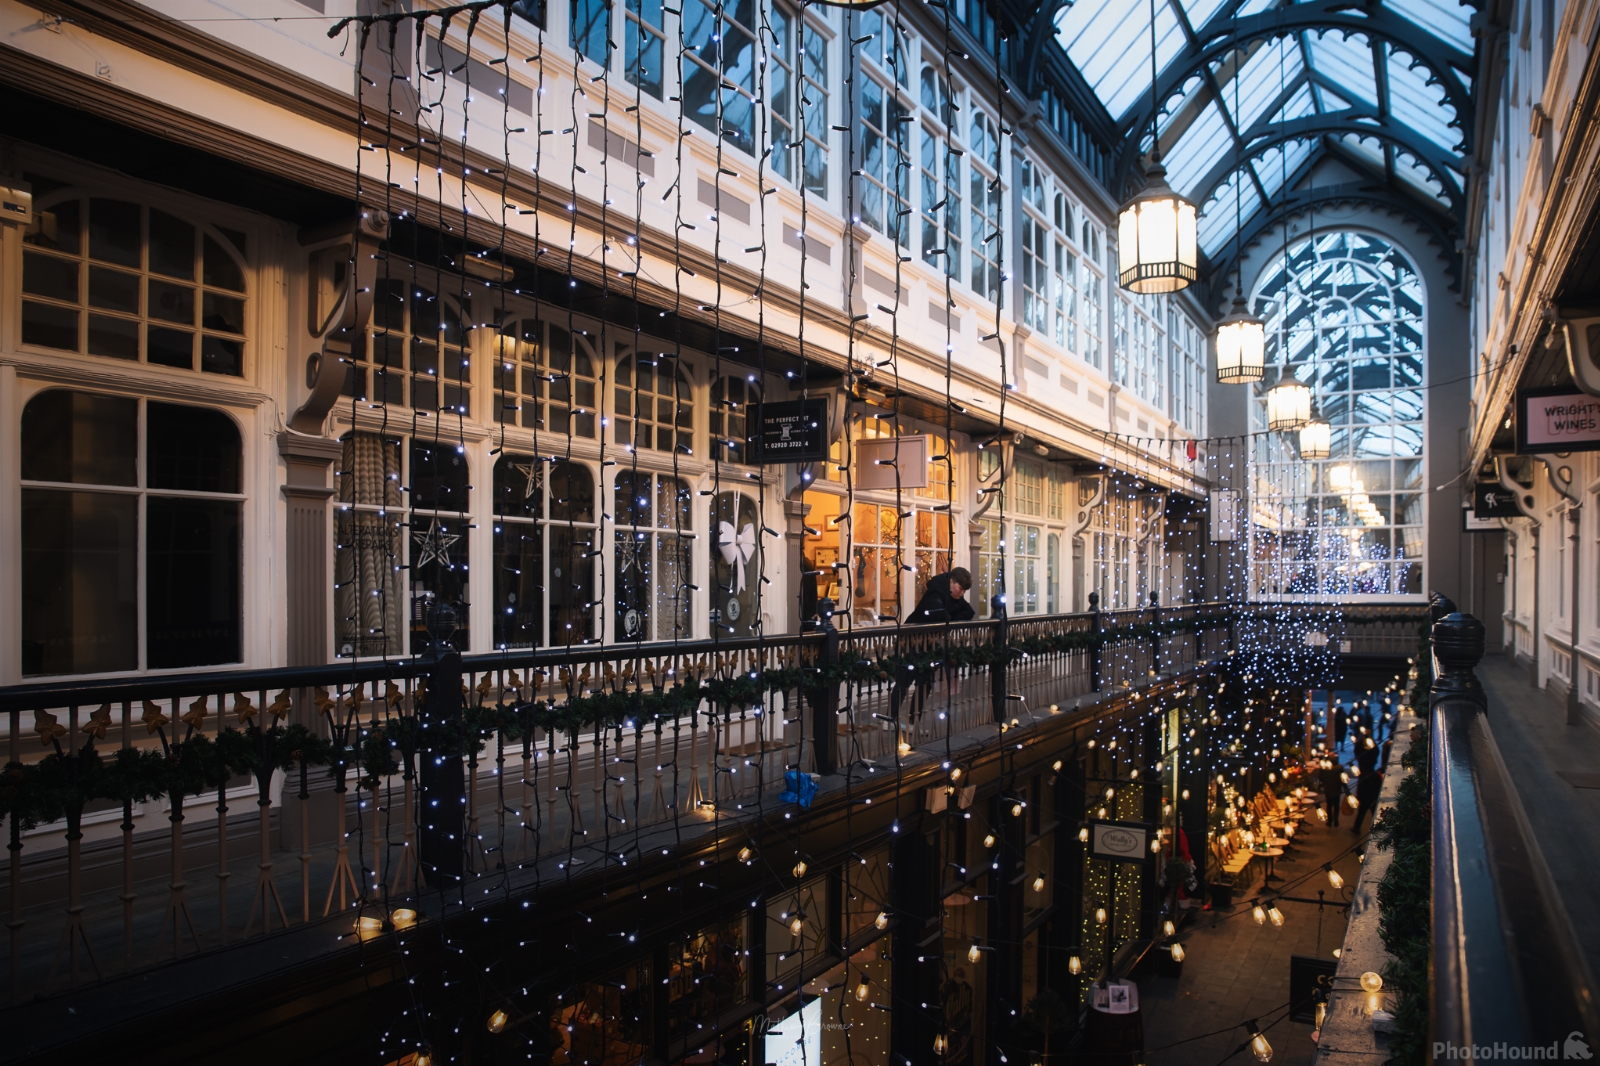 Image of Castle Arcade by Mathew Browne